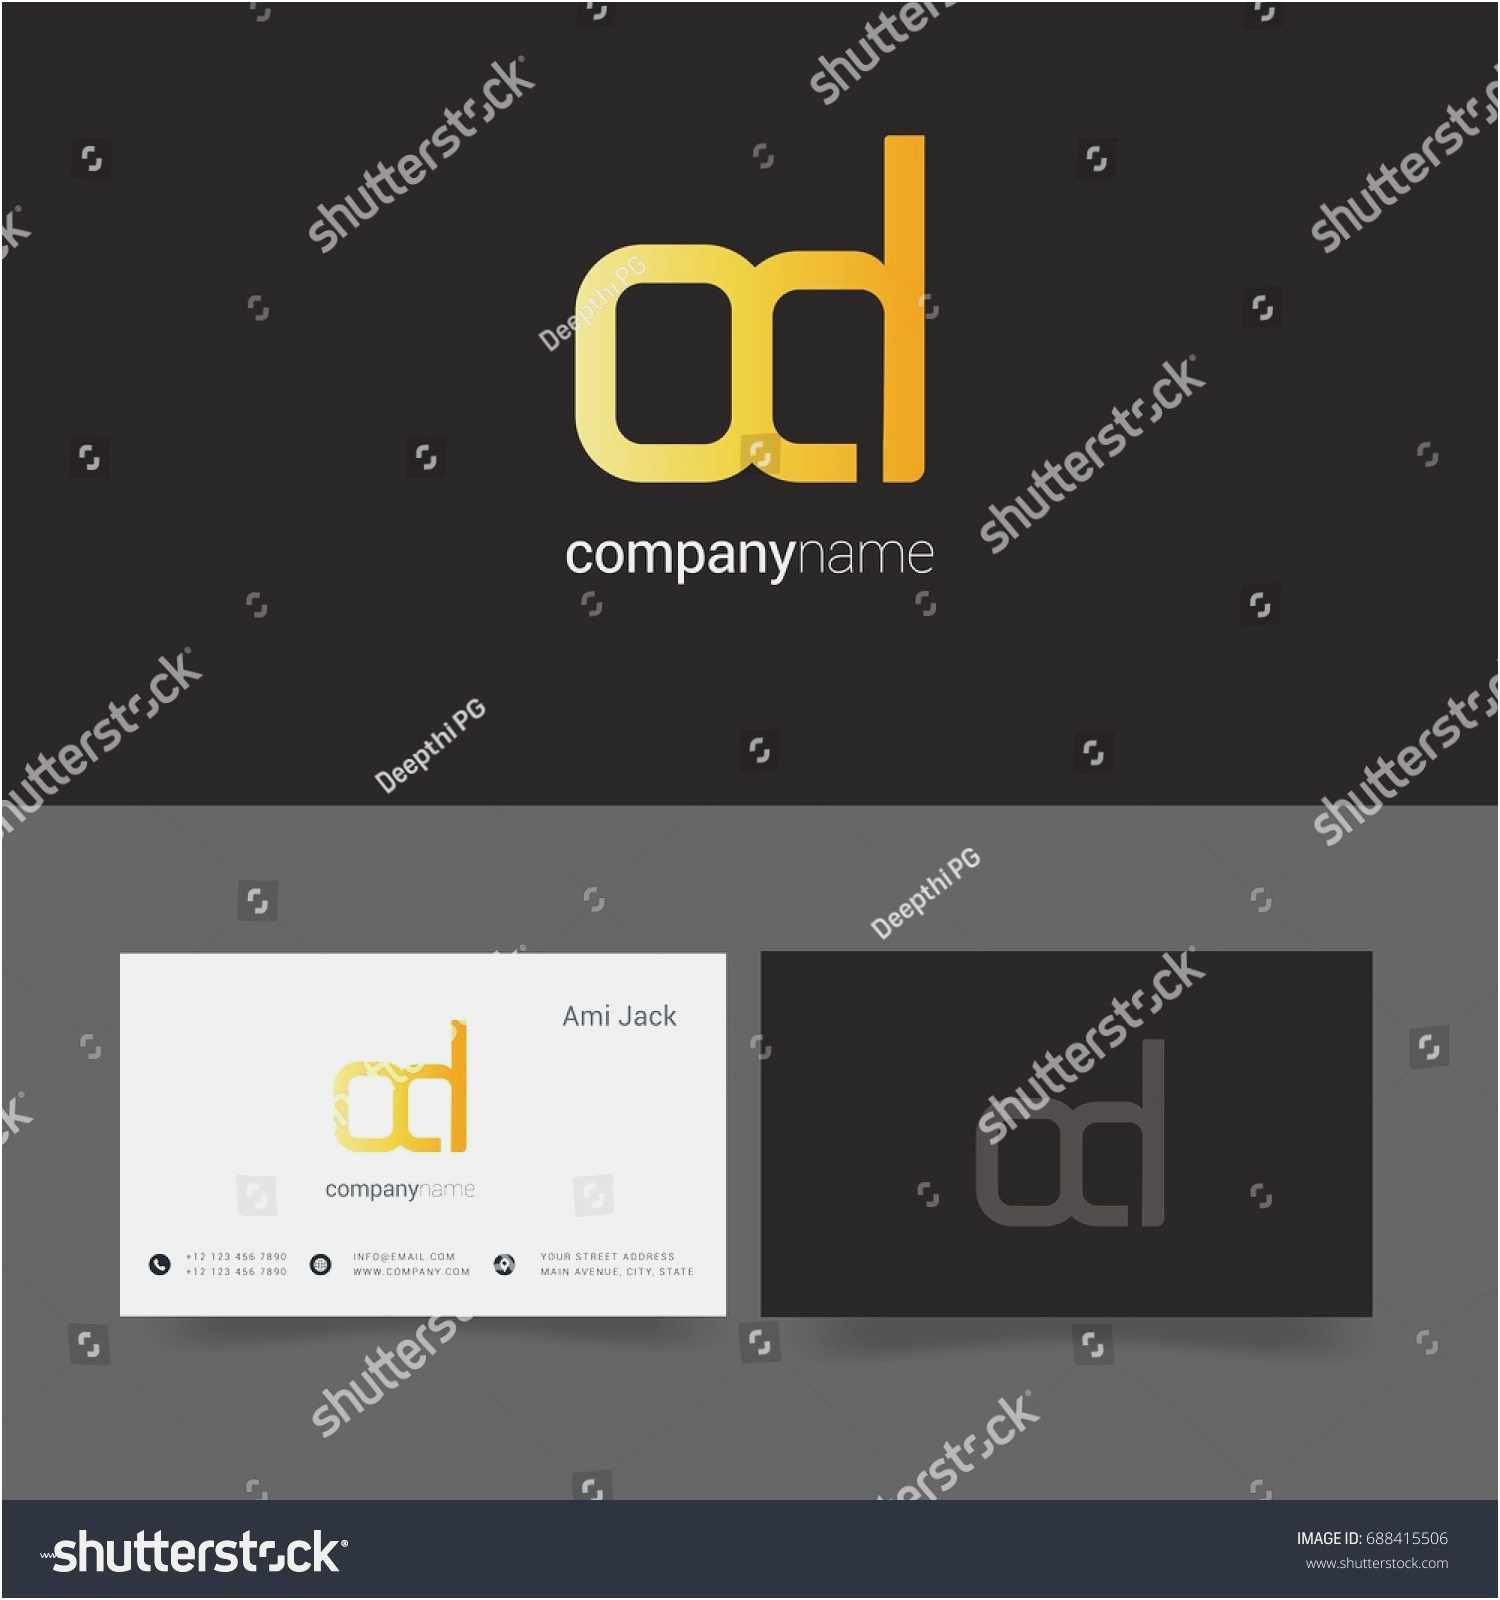 Free 54 Business Cards Templates New Of Outlook Business Card Template